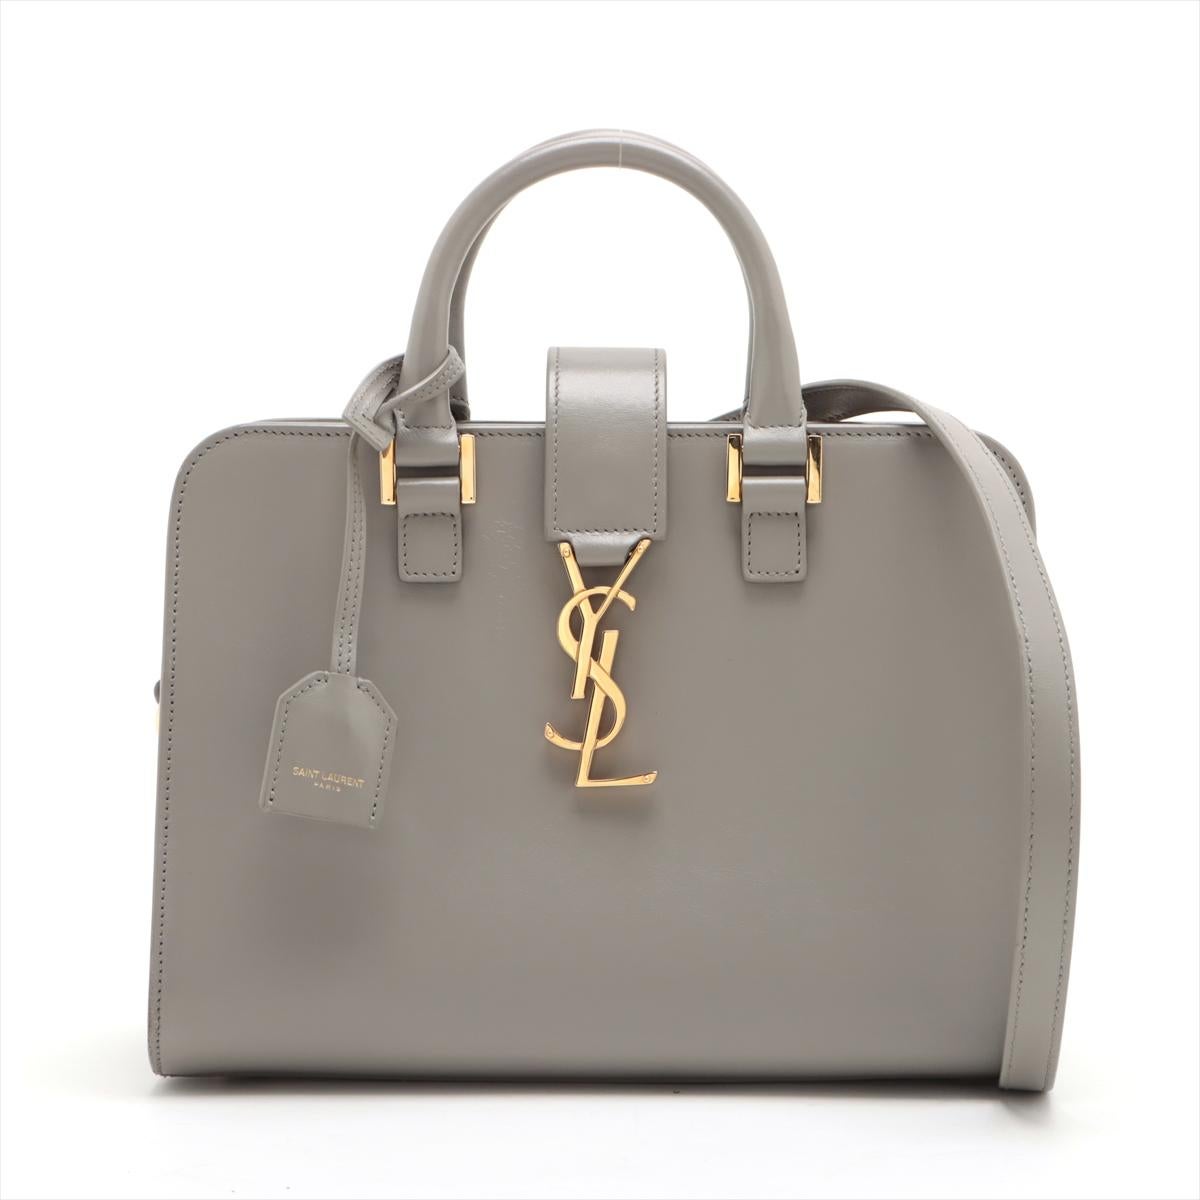 The Saint Laurent Paris Navy Cabas Leather Two-Way Handbag in Grey is a sophisticated and versatile accessory that exudes understated luxury. Crafted from high-quality leather, the handbag features a sleek and structured silhouette with minimalistic